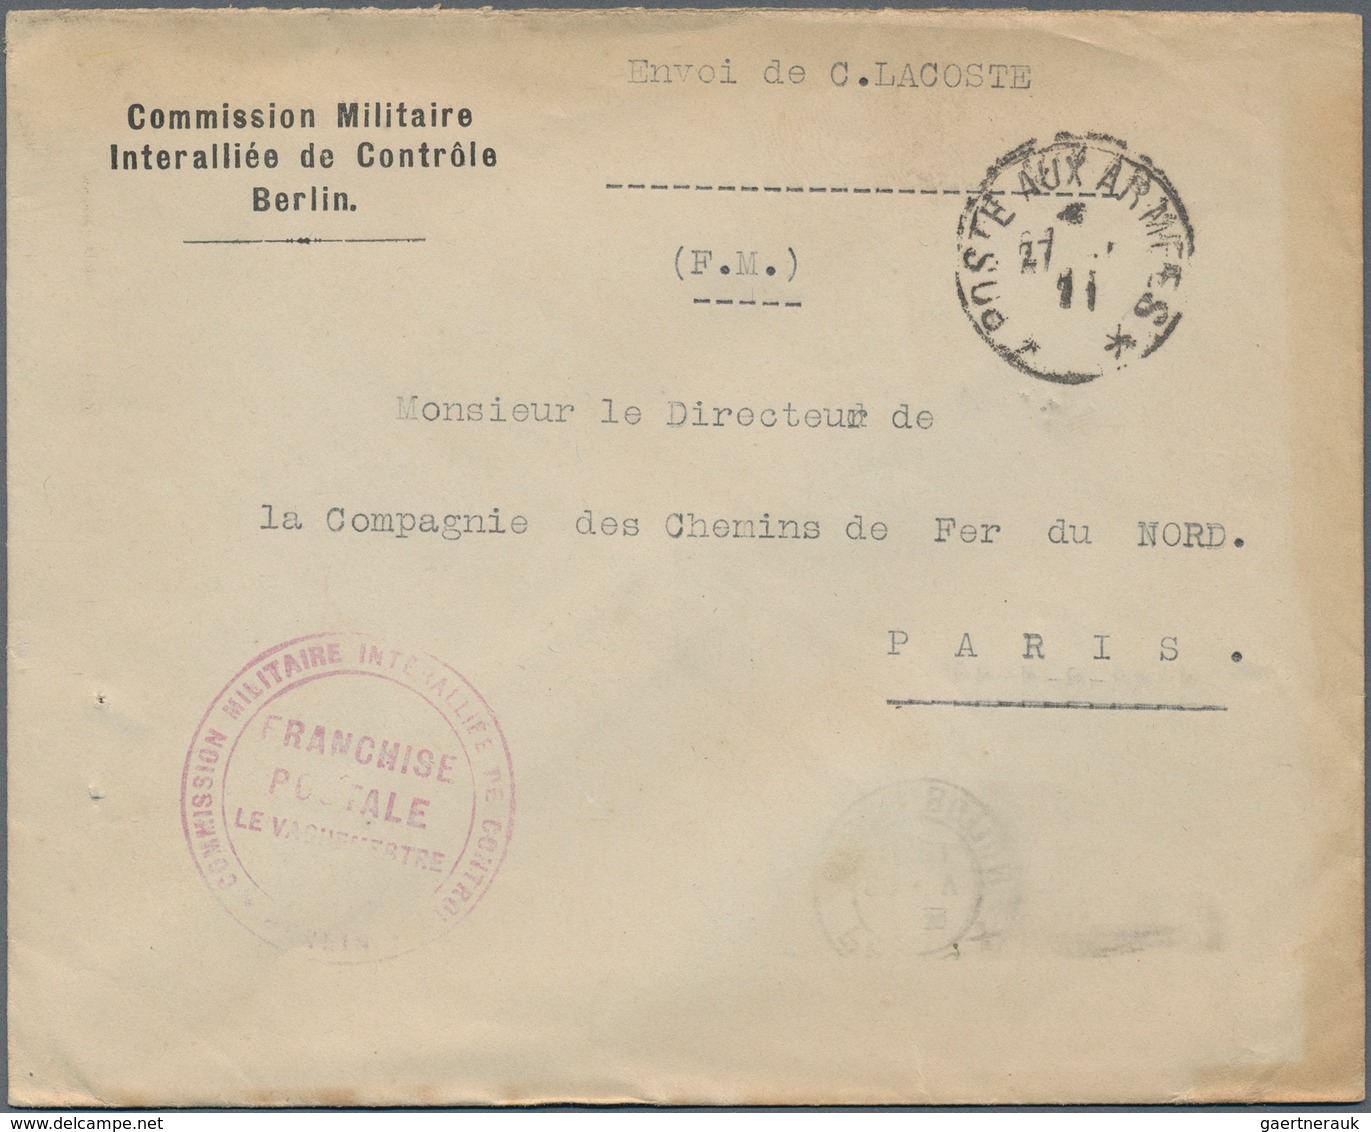 Frankreich: 1914/1921, holding of apprx. 2000+ field post covers/fronts + related, showing a vast ra